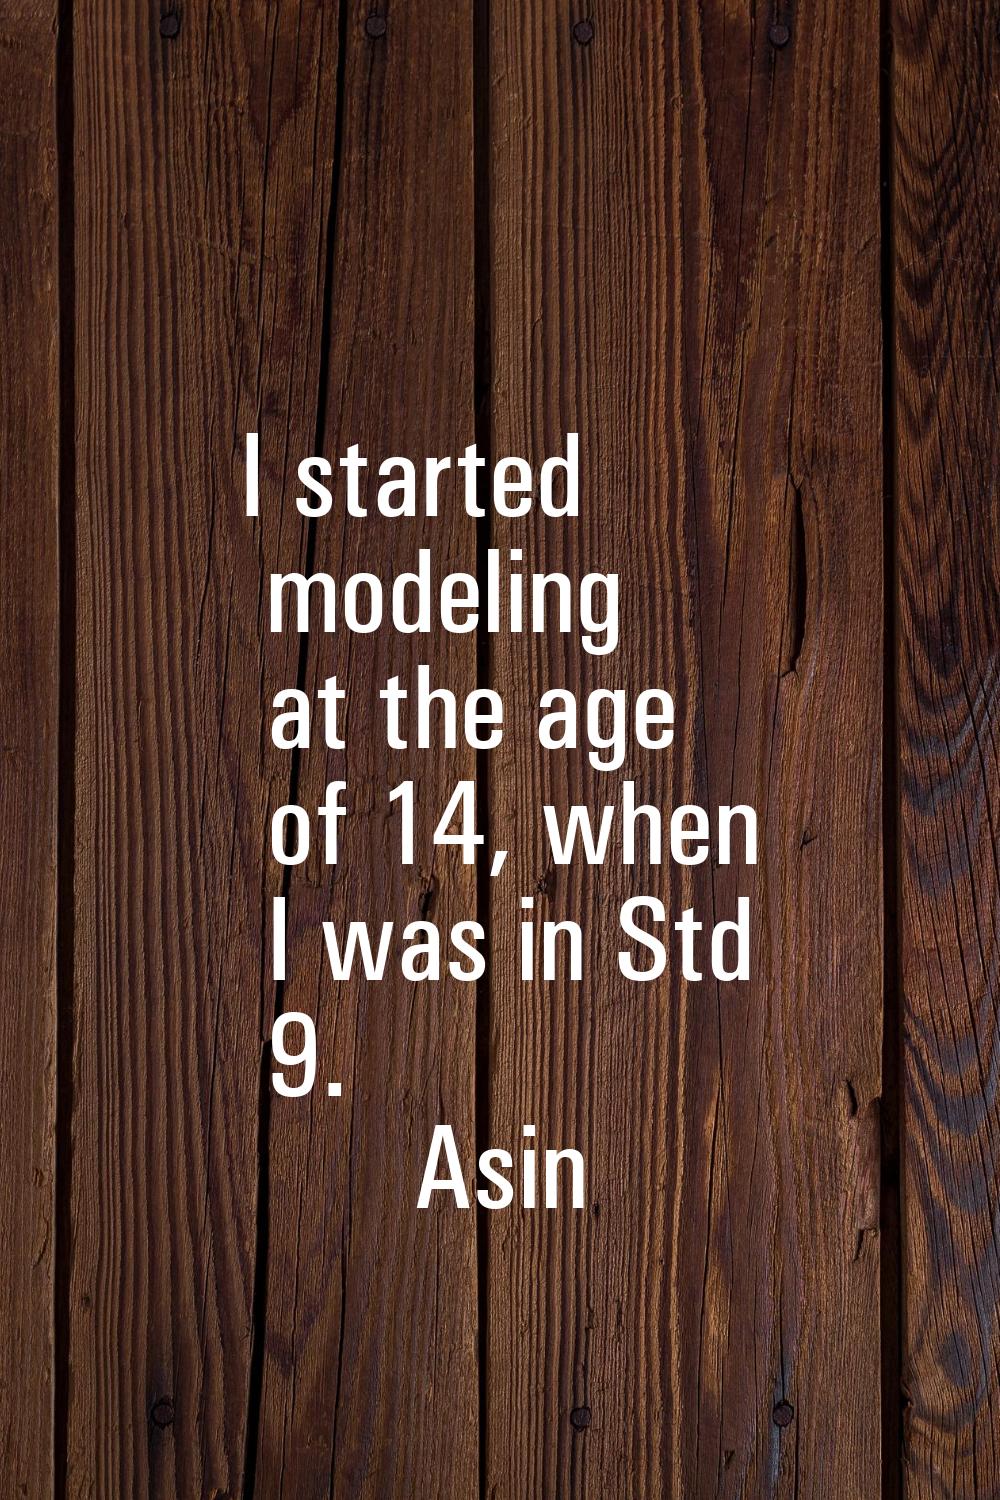 I started modeling at the age of 14, when I was in Std 9.